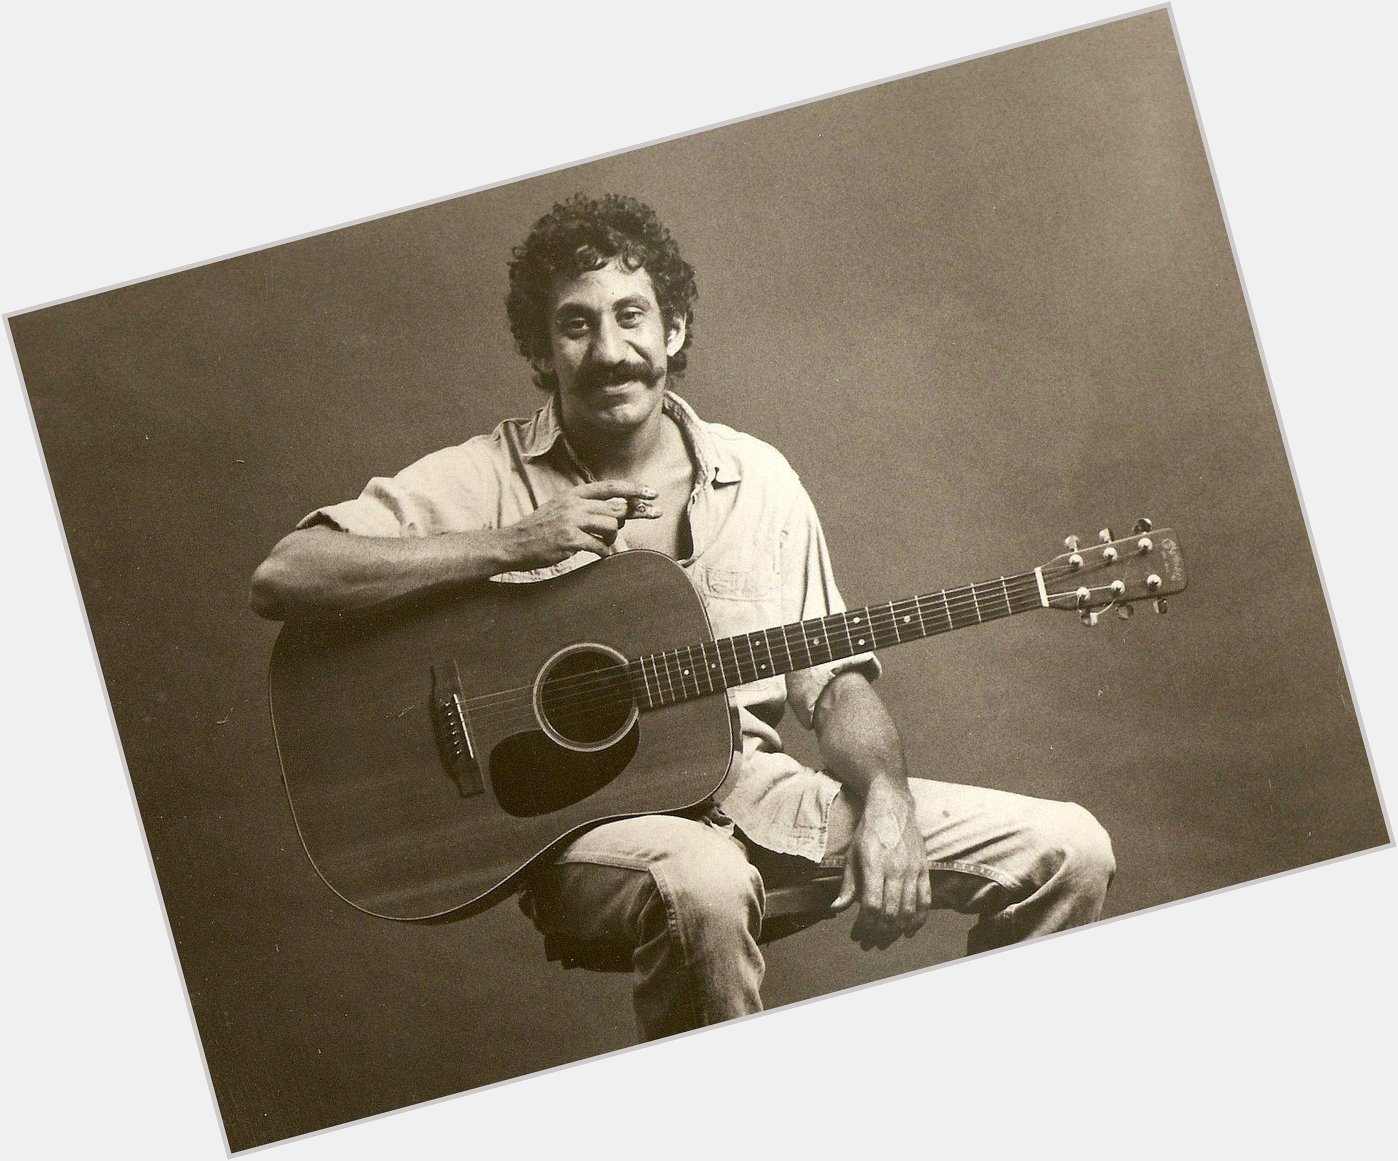 Happy Birthday to Jim Croce, who would have turned 72 today! 